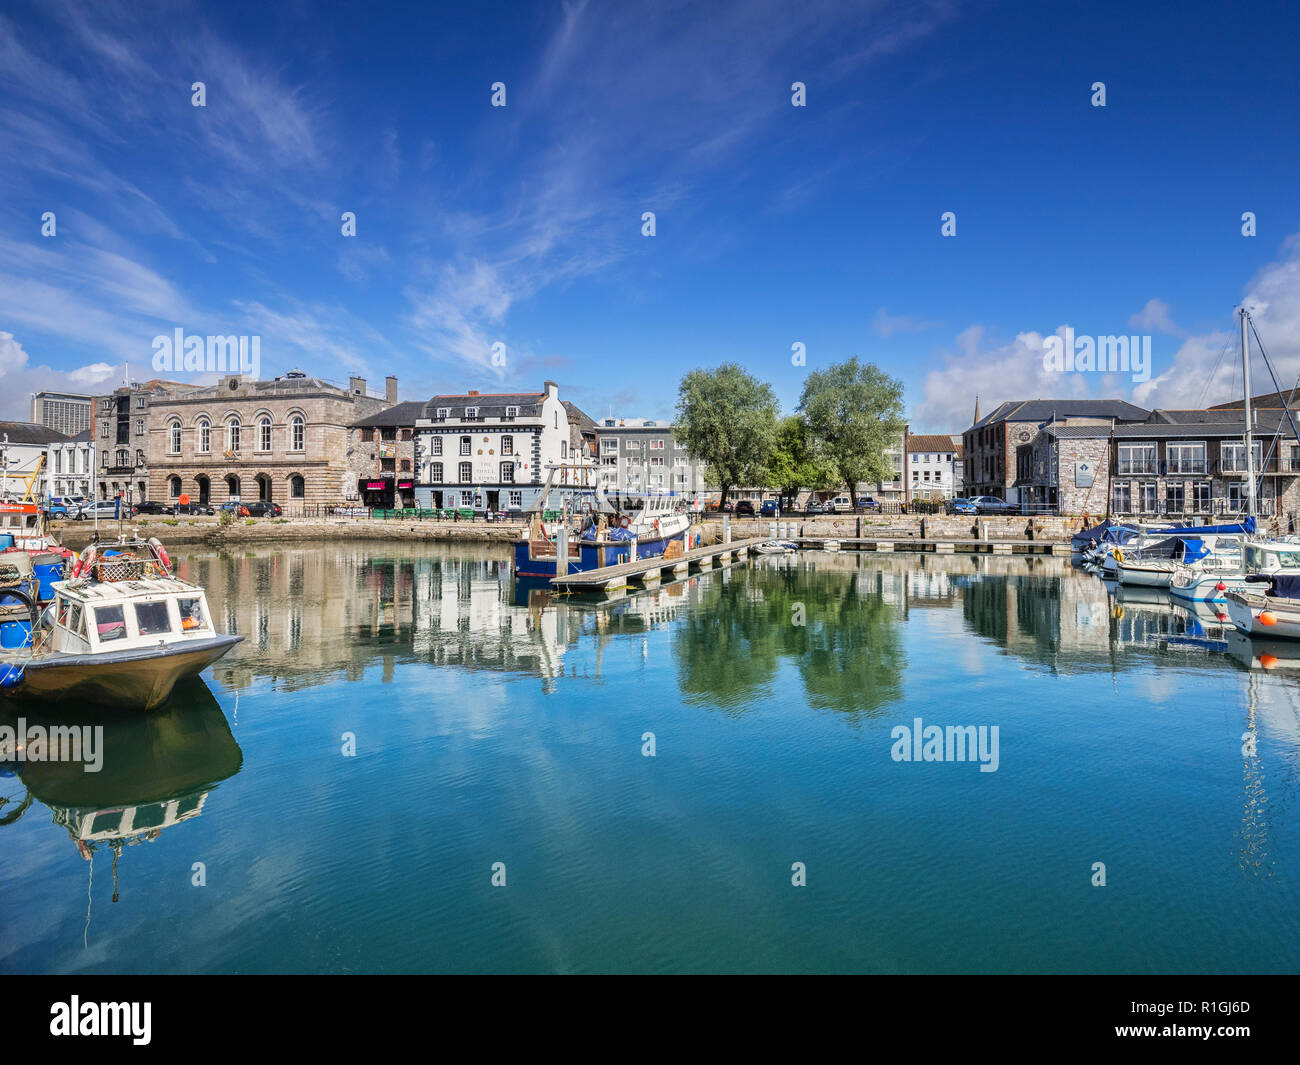 2 June 2018: Plymouth, Devon, UK - The Barbican with The Three Crowns public house reflecting in the water. Stock Photo